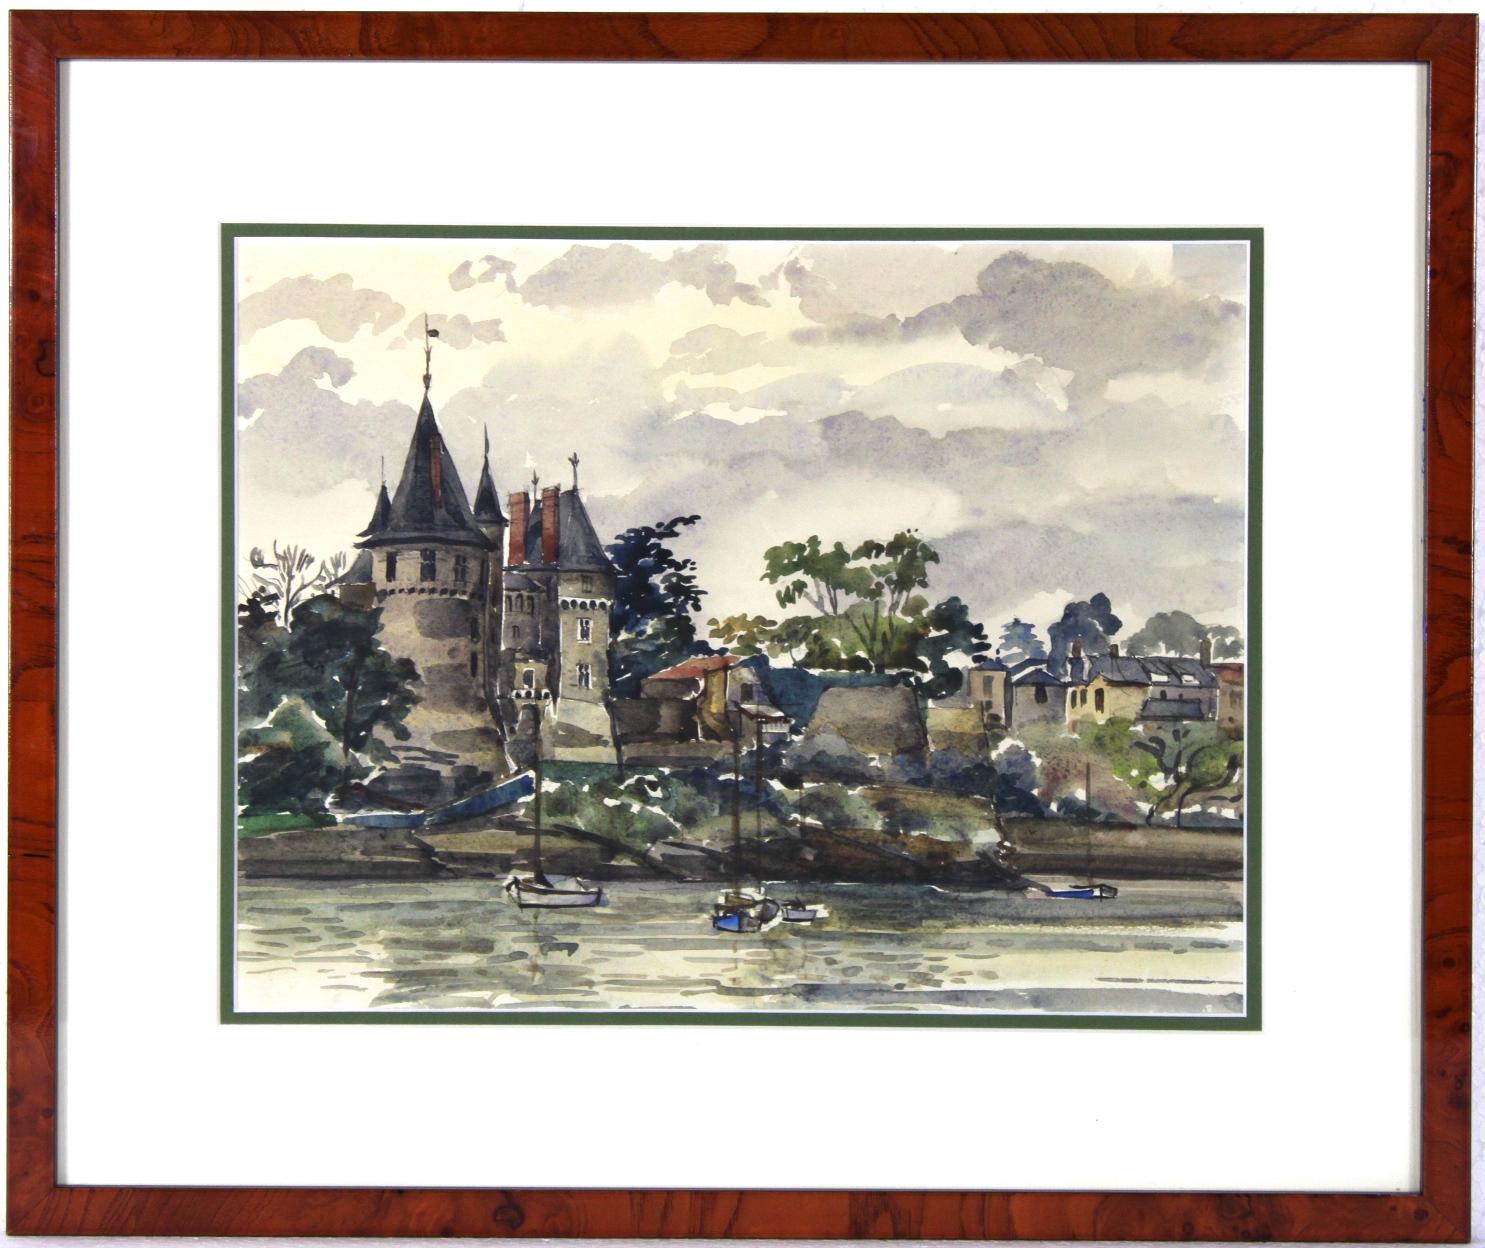 Unknown Landscape Painting - Castle at riverside, Original French Watercolor, Impressionist style